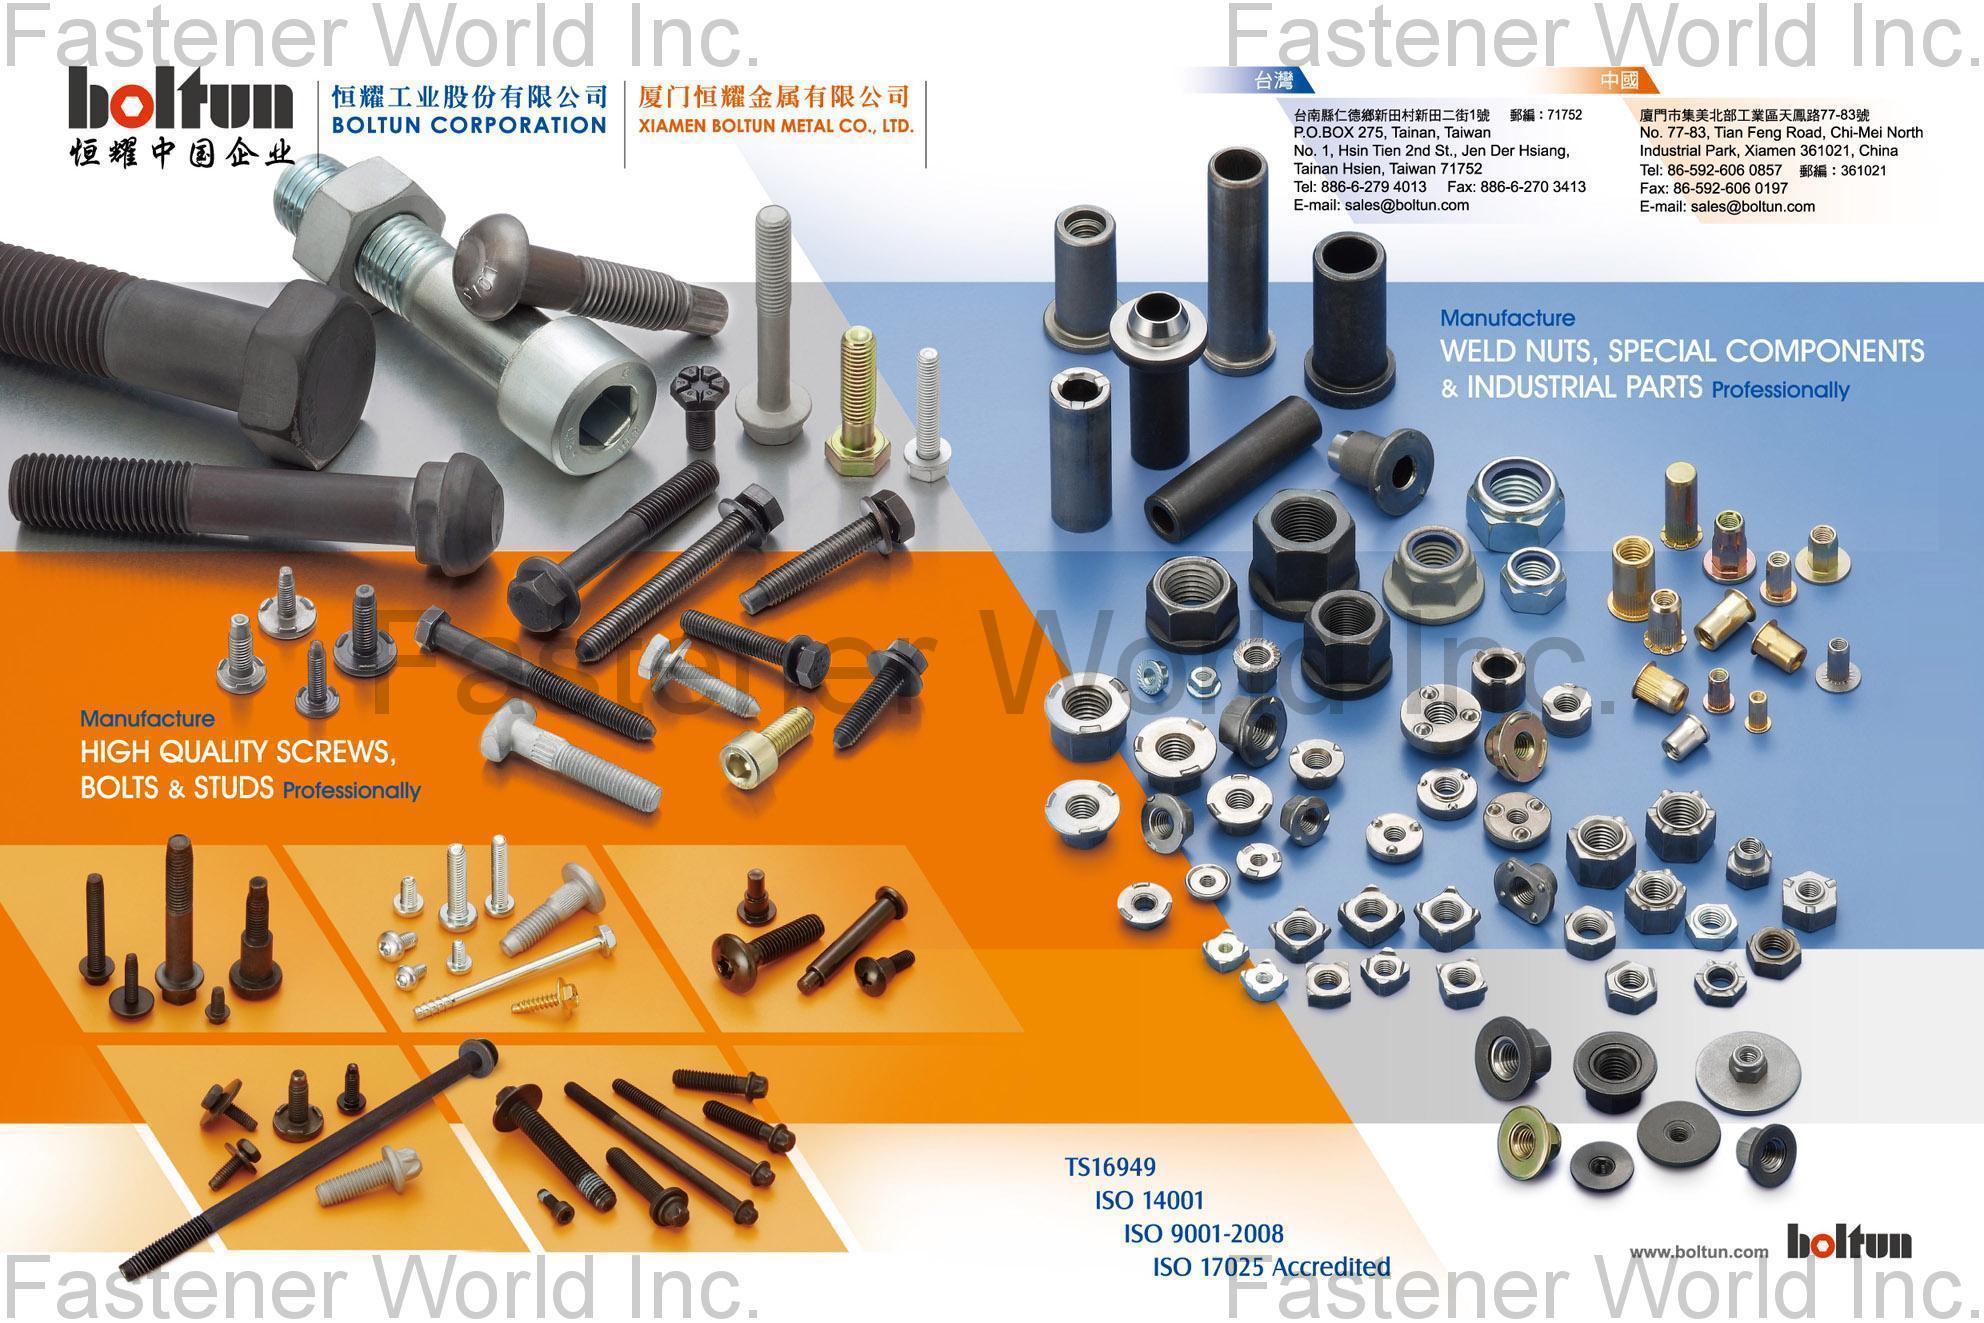 All Kinds Of Nuts Welding Nuts,Rivet Nuts,Clinch Nuts,Locking Nuts,Nylon Insert Nuts,Conical Washer Nuts,T-Nuts,CNC Machining Parts,Stamping Parts,Bushed & Sleeves,Assembly Components,Special Parts,HEX. Bolt & Screw,Flange Bolt,Socket,Sems,Screw With Welding Projection,Screw With Welding Ring & Points,Clinch Bolt,T C Bolt,Special Pin,Wheel Bolt,Rail Bolt,Rail Bolts Construction Fasteners: Nuts, Screws & Washers,Wind Turbine Fasteners Kits: Nuts, Bolts & Washers Truck Wheel Bolts,Bolts & Nuts & Components,Motorcycle parts,Nylon rings & special washer,Expansion Bolt